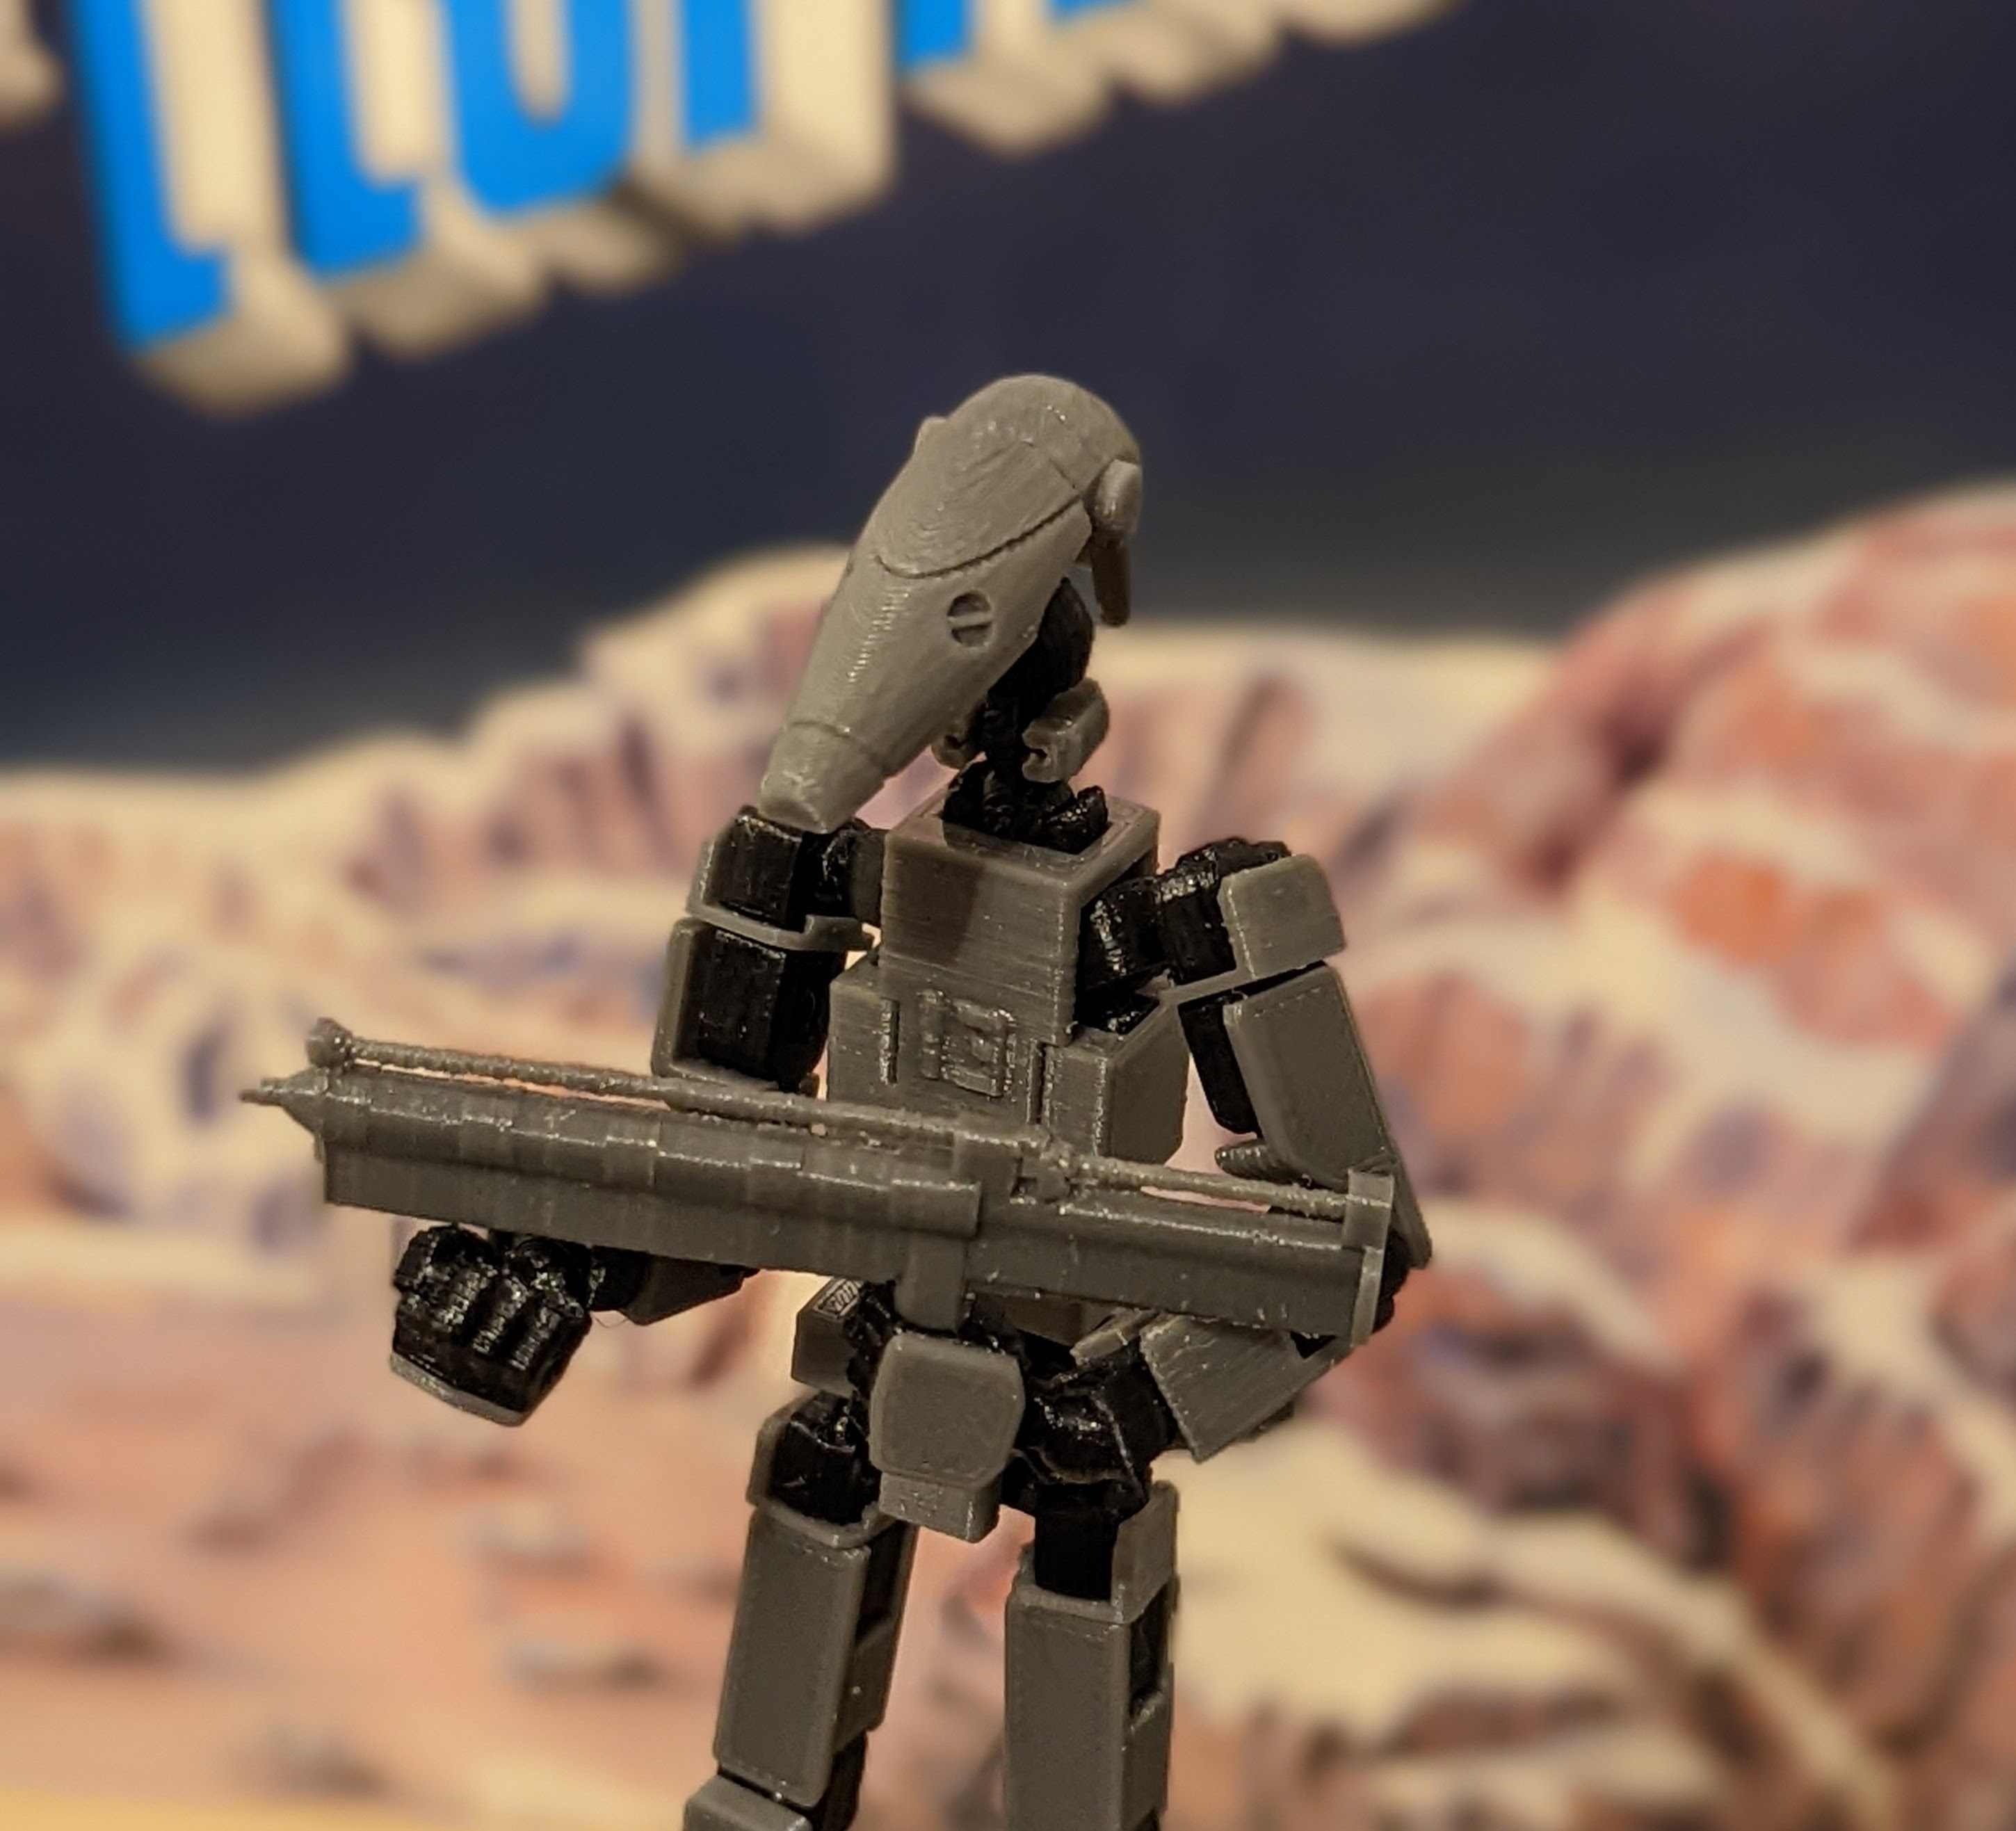 B1 battle droid for LUCKY 13